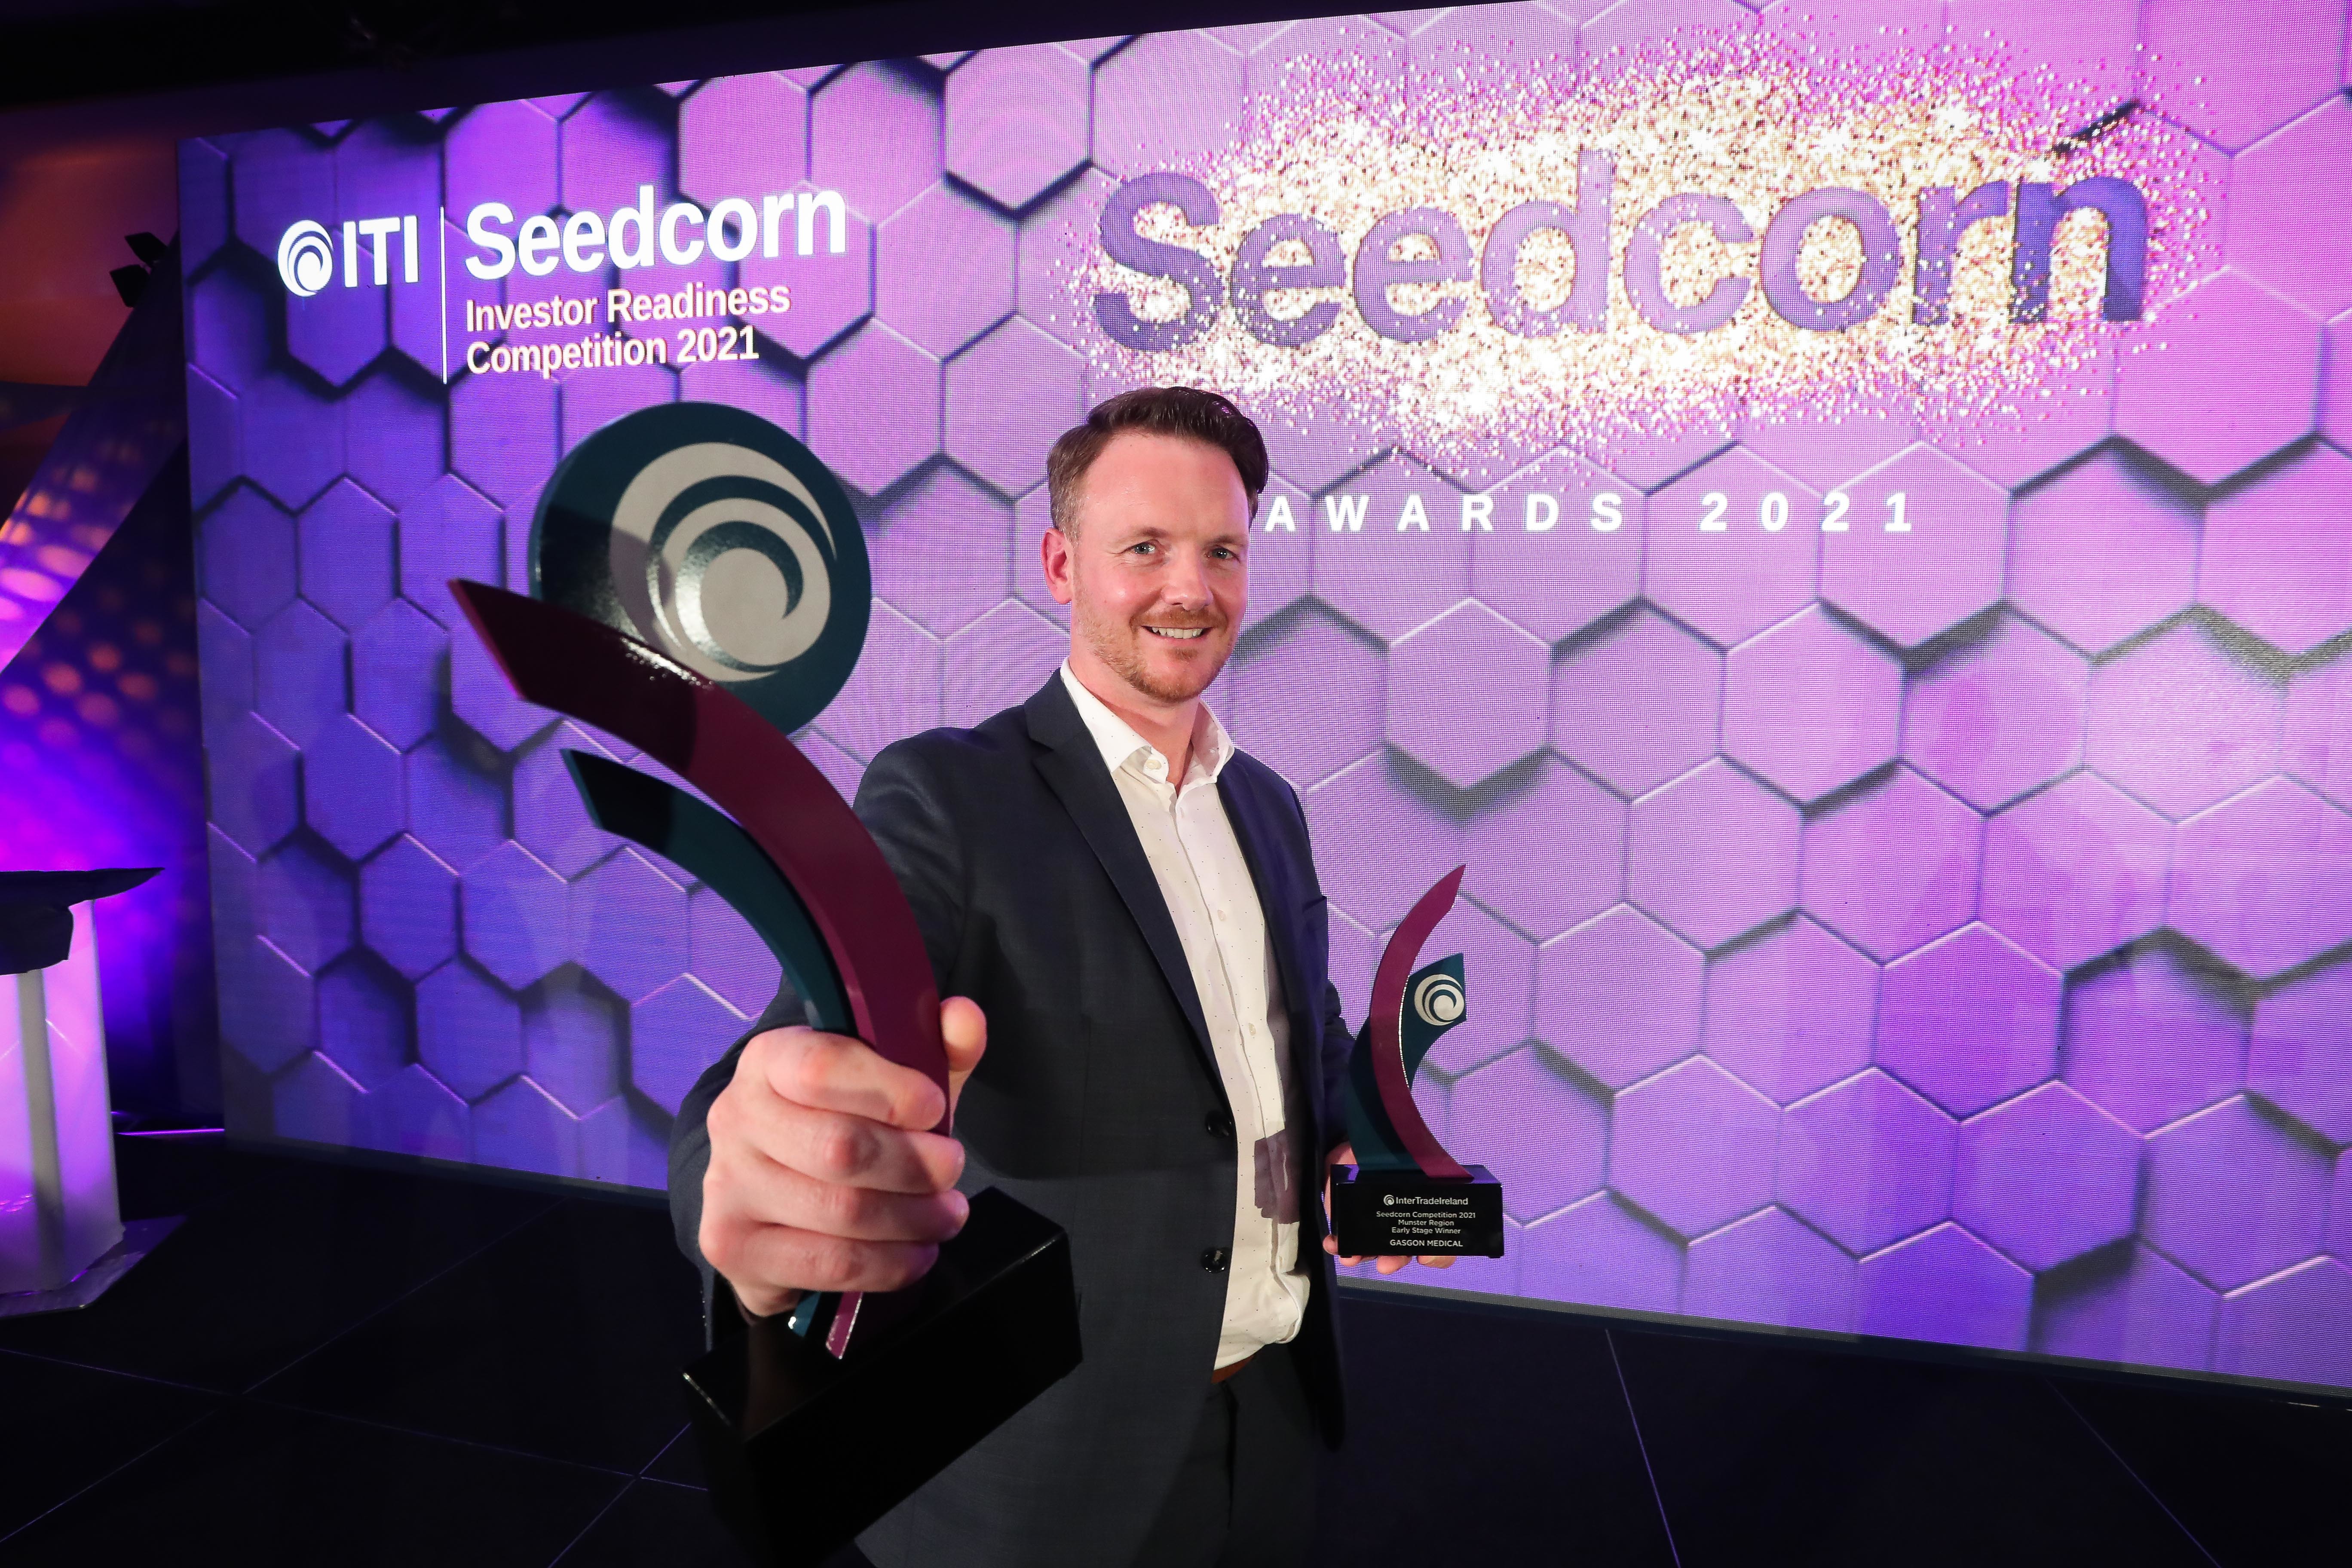 2021 Overall Winner of the Seedcorn Investor Readiness Competition, Vincent Forde, CEO of Gasgon Medical